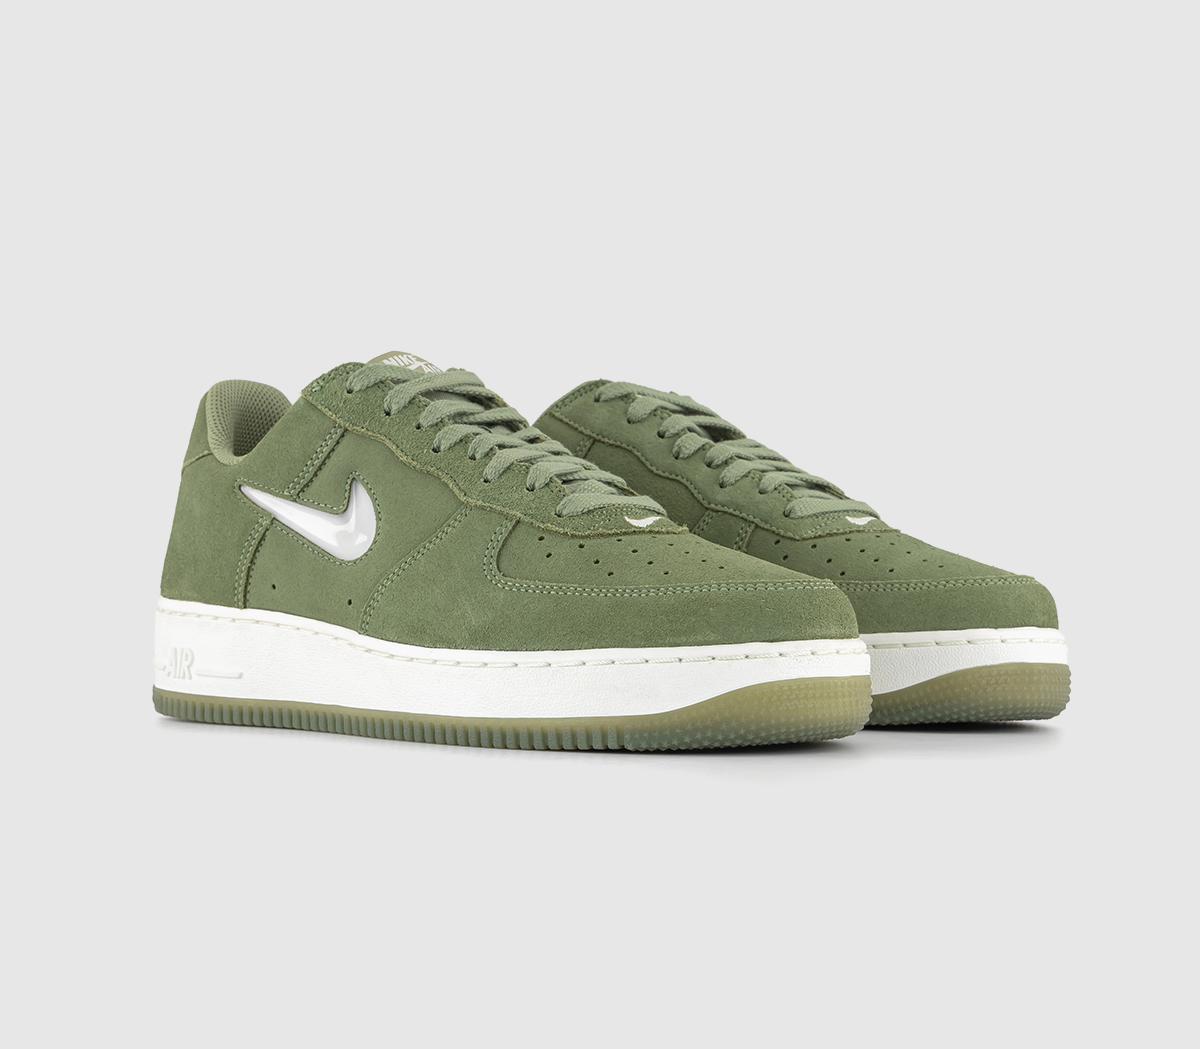 Nike Air Force 1 07 Trainers Oil Green Summit White - Men's Trainers